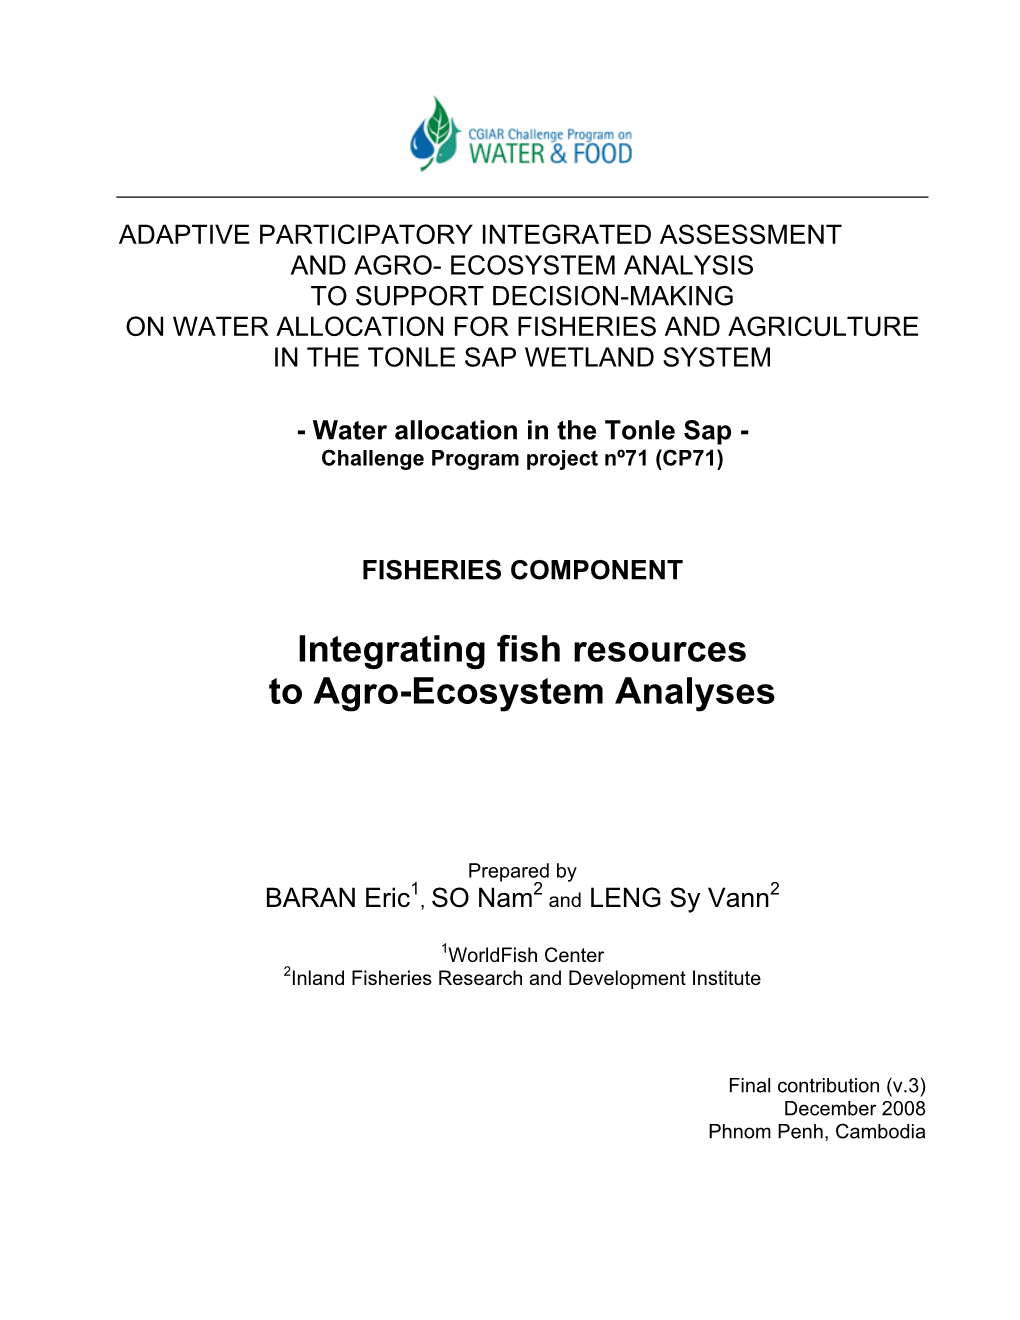 Integrating Fish Resources to Agro-Ecosystem Analyses